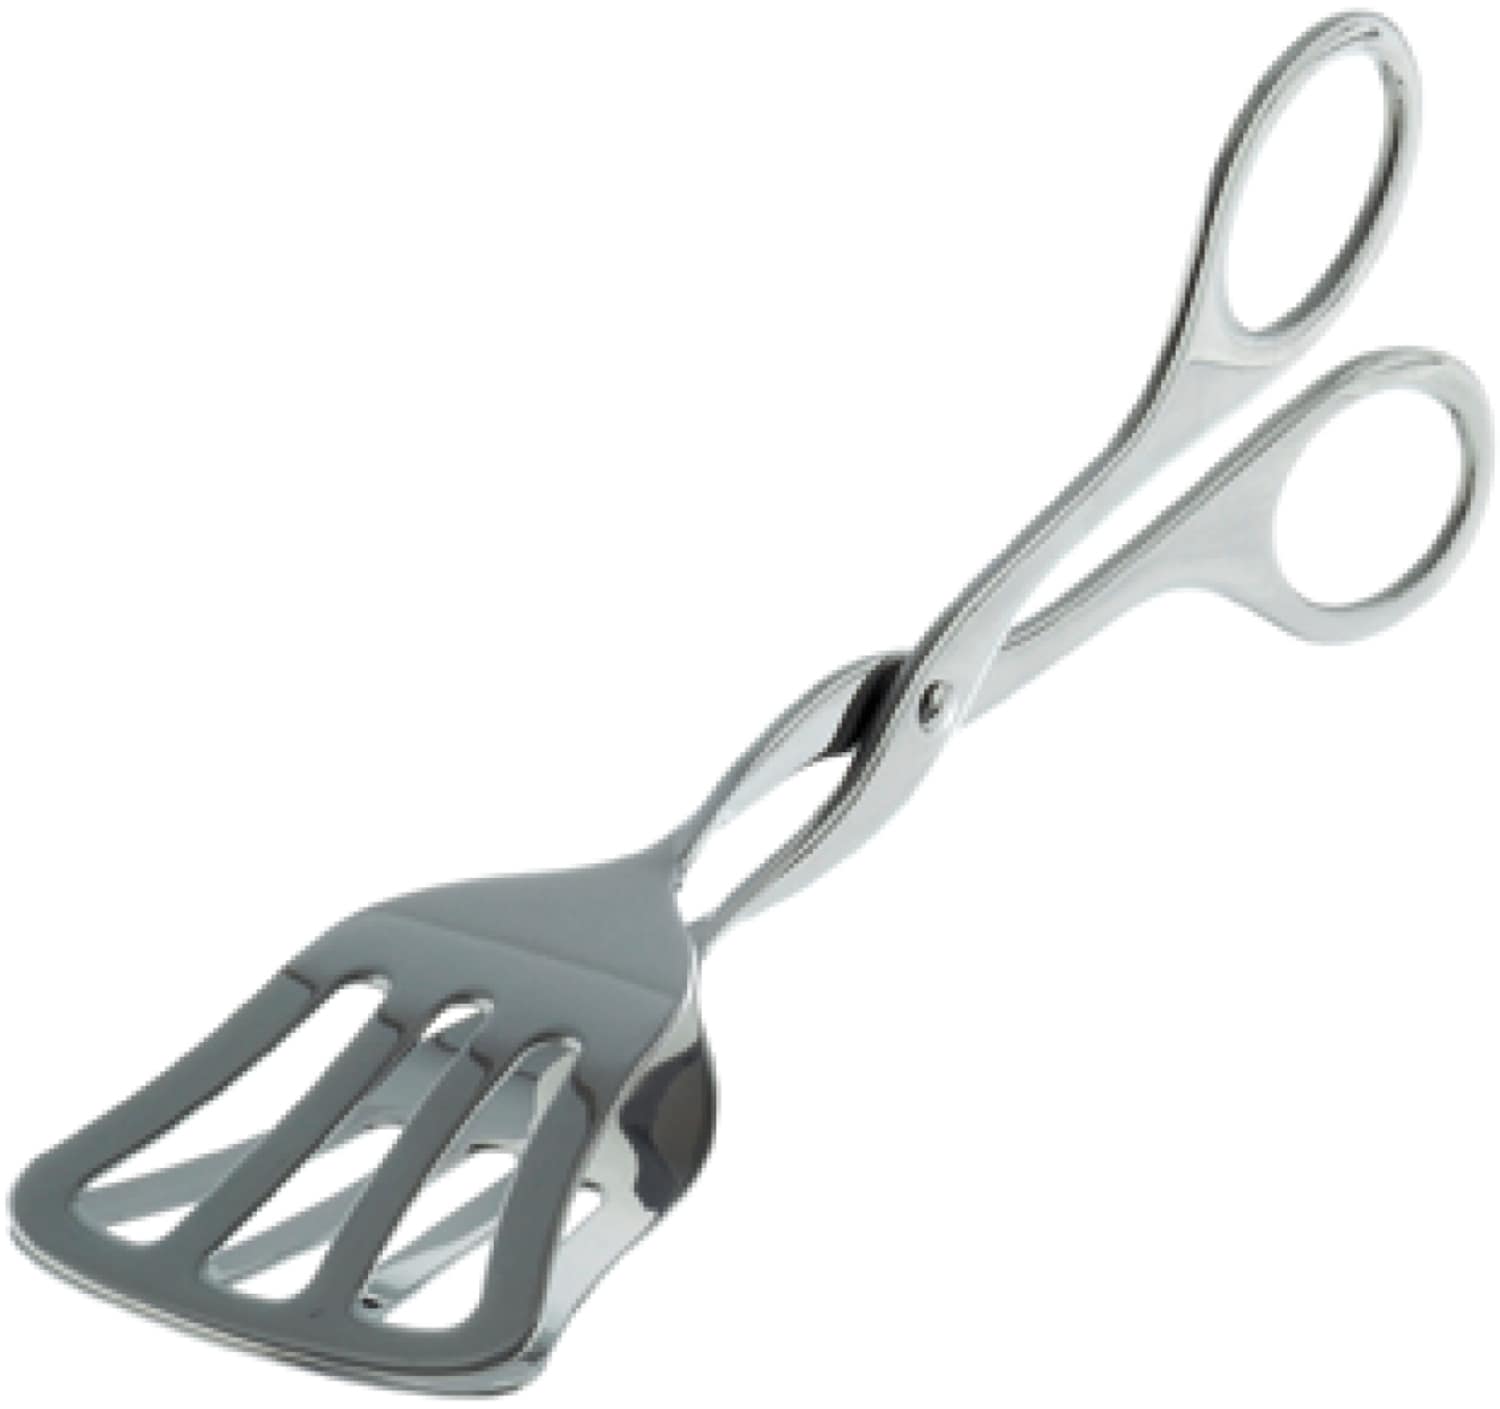 Pastry tongs open